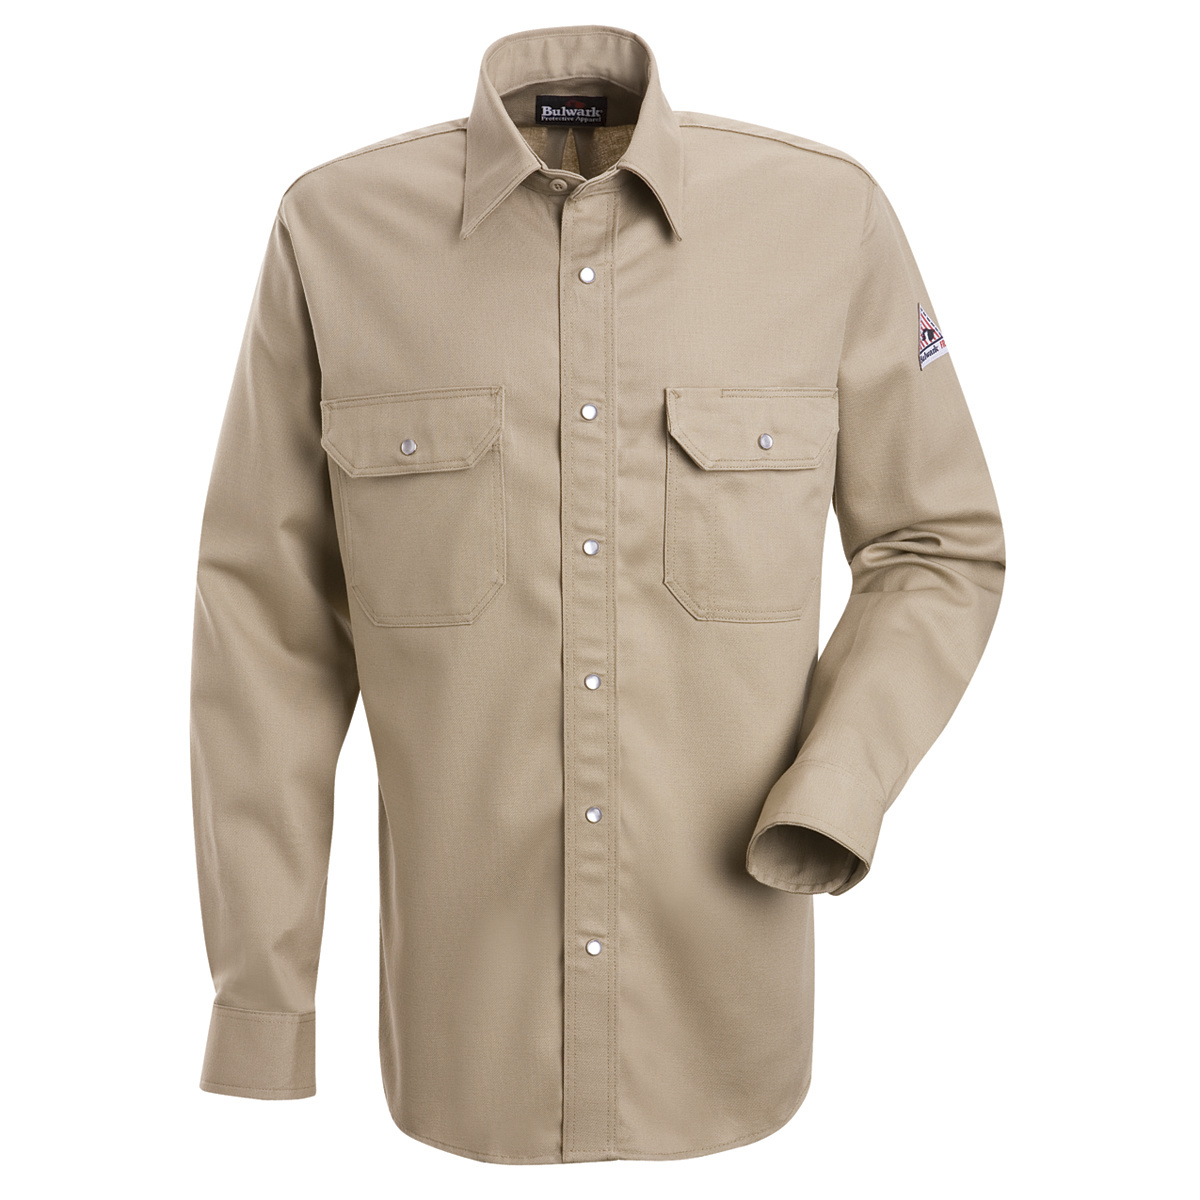 Bulwark® 2X 2X-Tall Tan EXCEL FR® Cotton Flame Resistant Uniform Shirt With Snap Front Closure